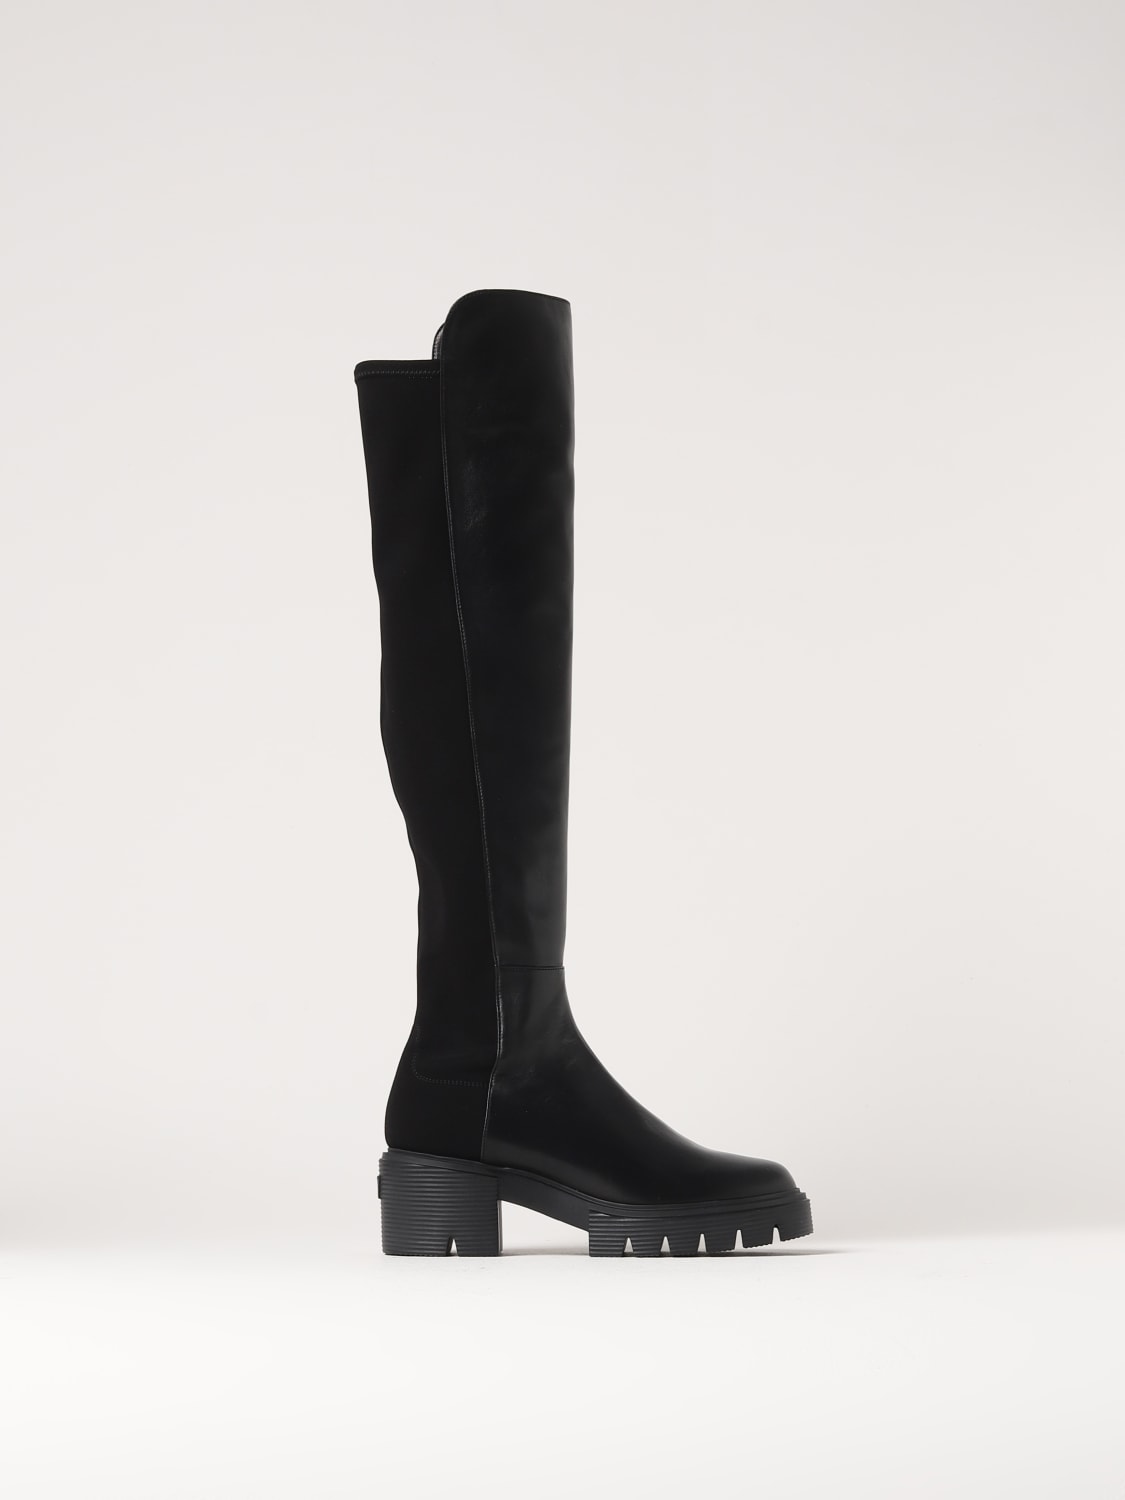 Stuart Weitzman Outlet: 5050 Soho boots in nappa leather and stretch knit -  Black | Stuart Weitzman boots SC728 online at GIGLIO.COM